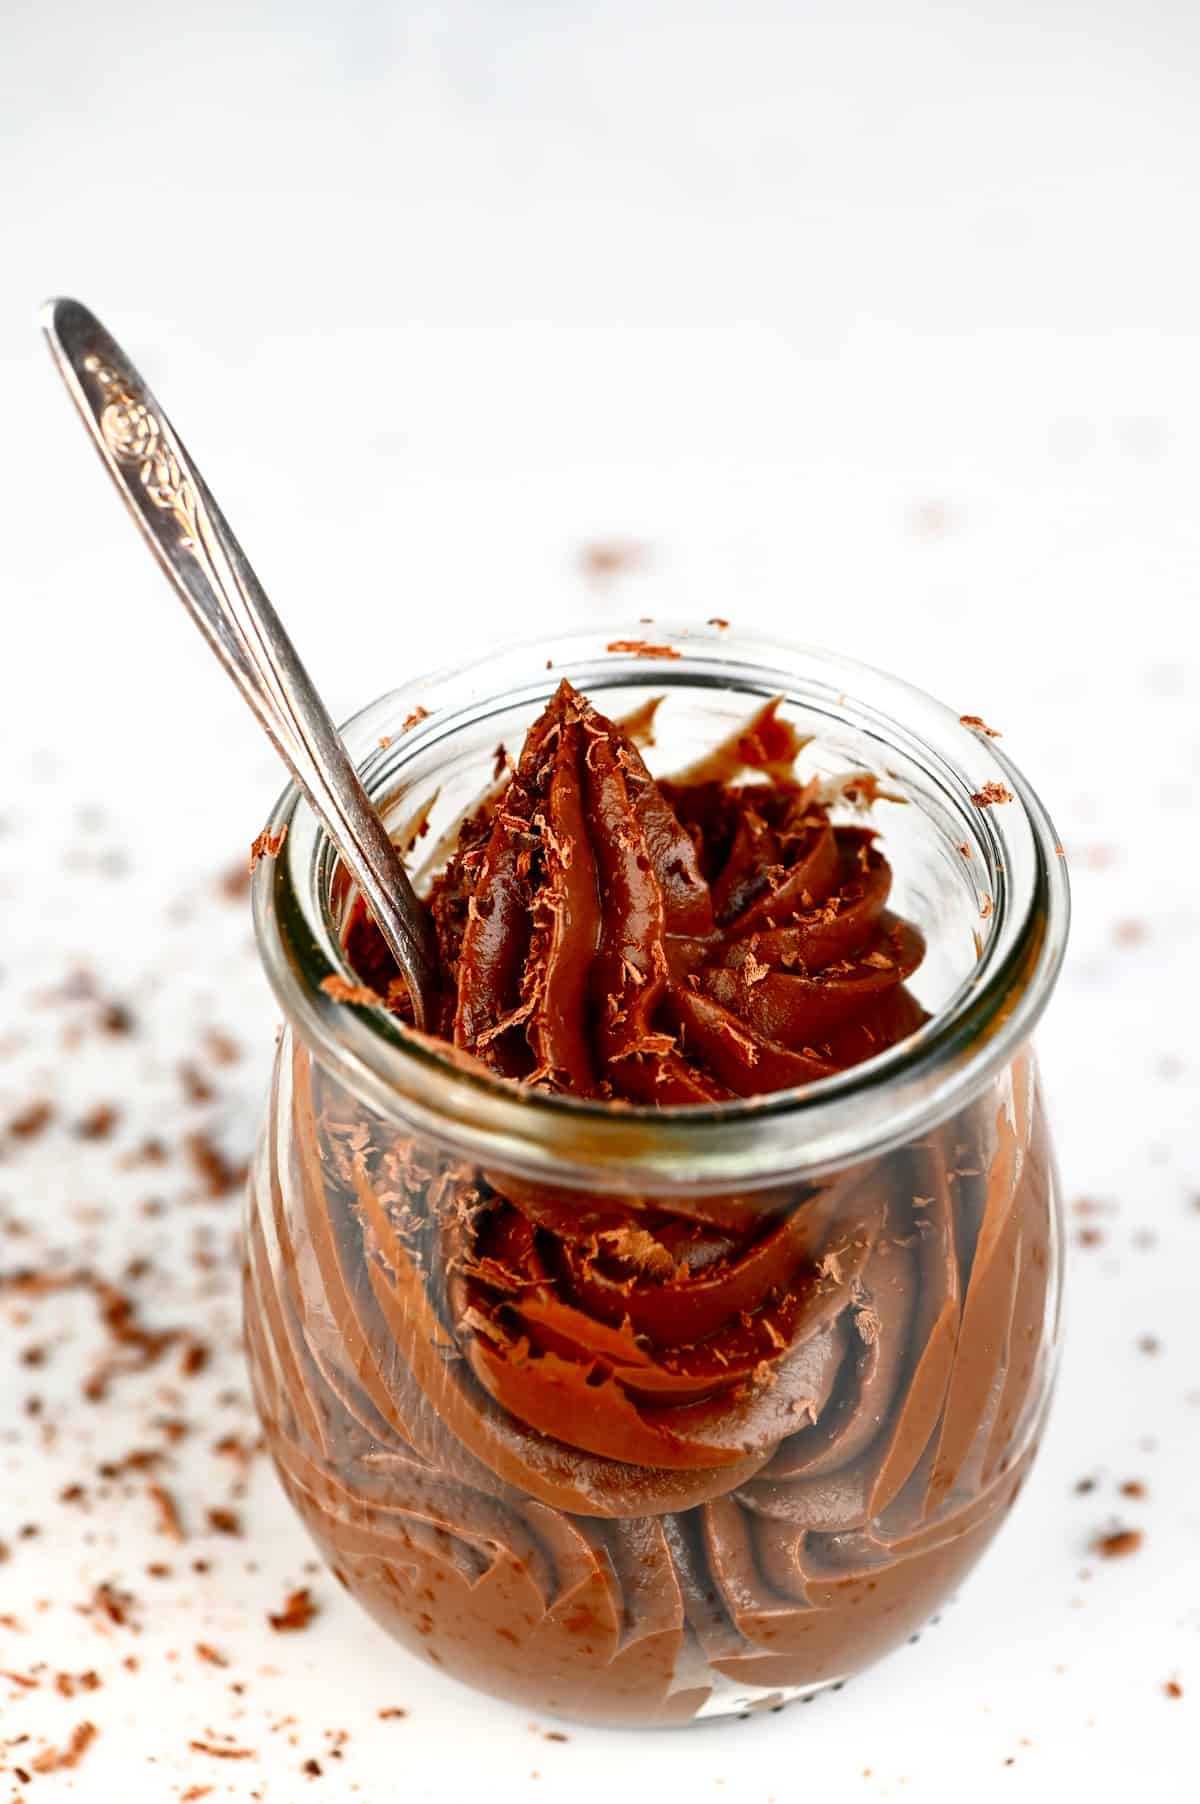 A little jar with Chocolate Pastry Cream and a spoon